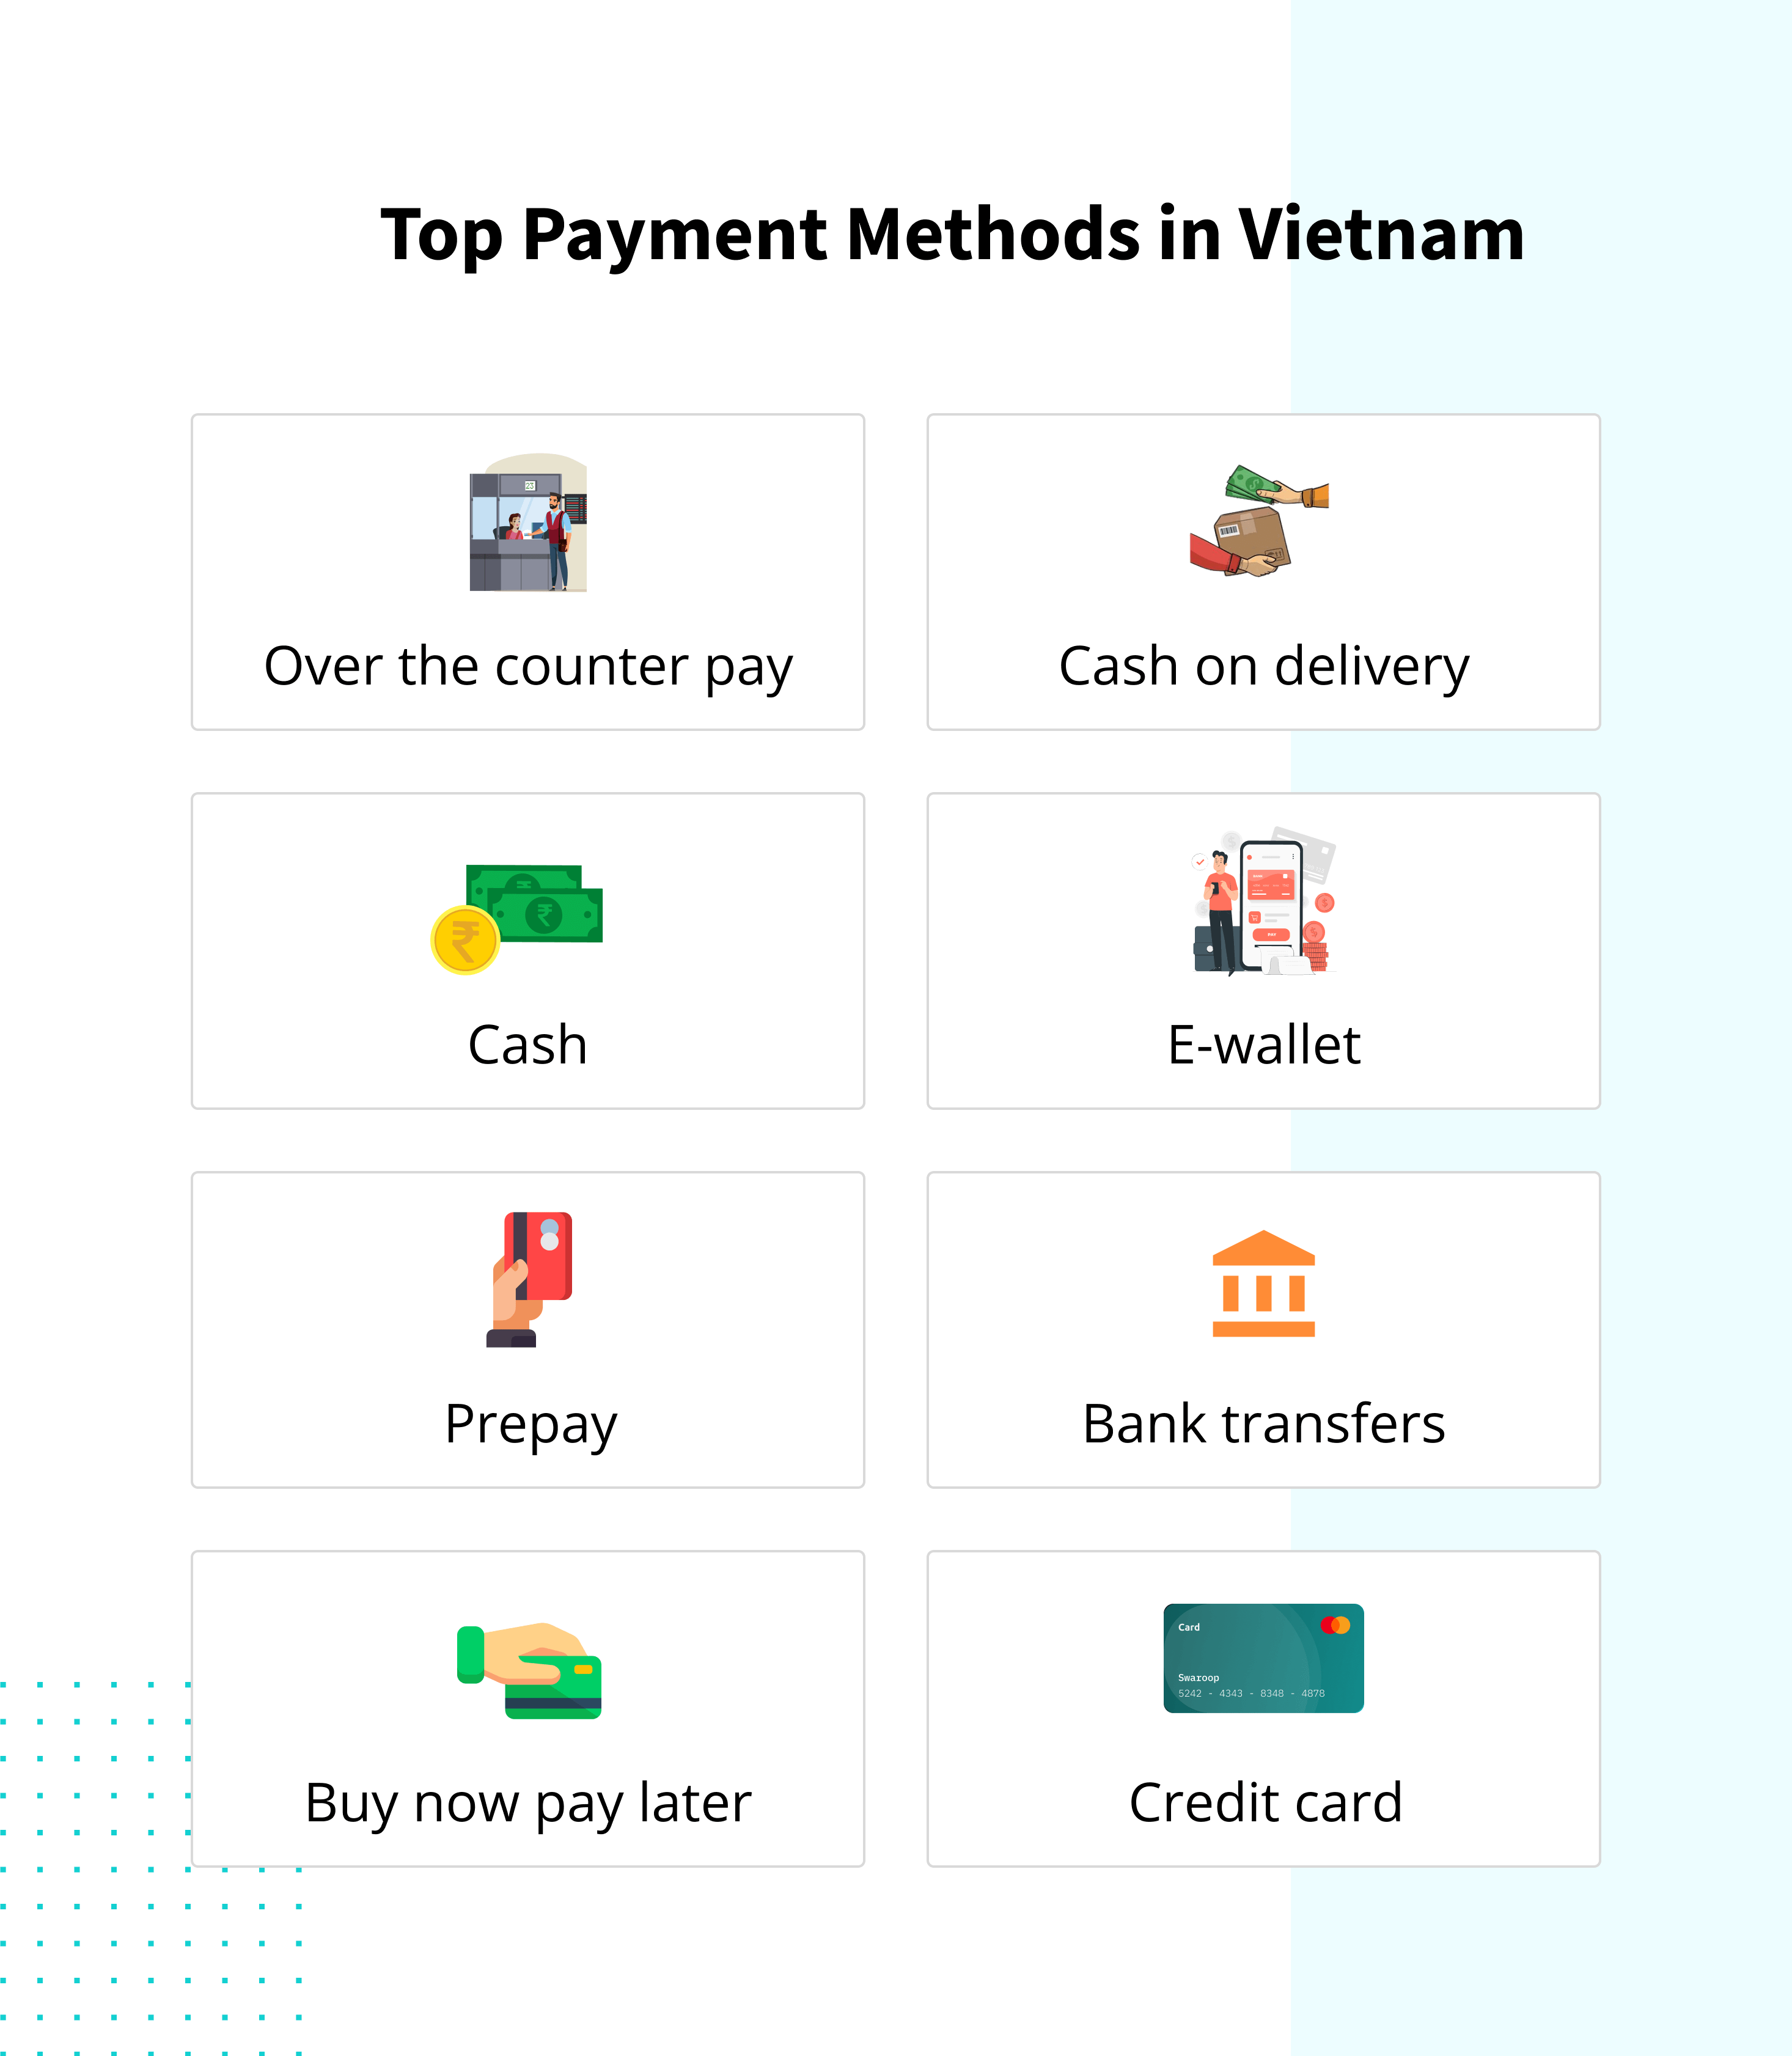 Several payment methods are popular in Vietnam